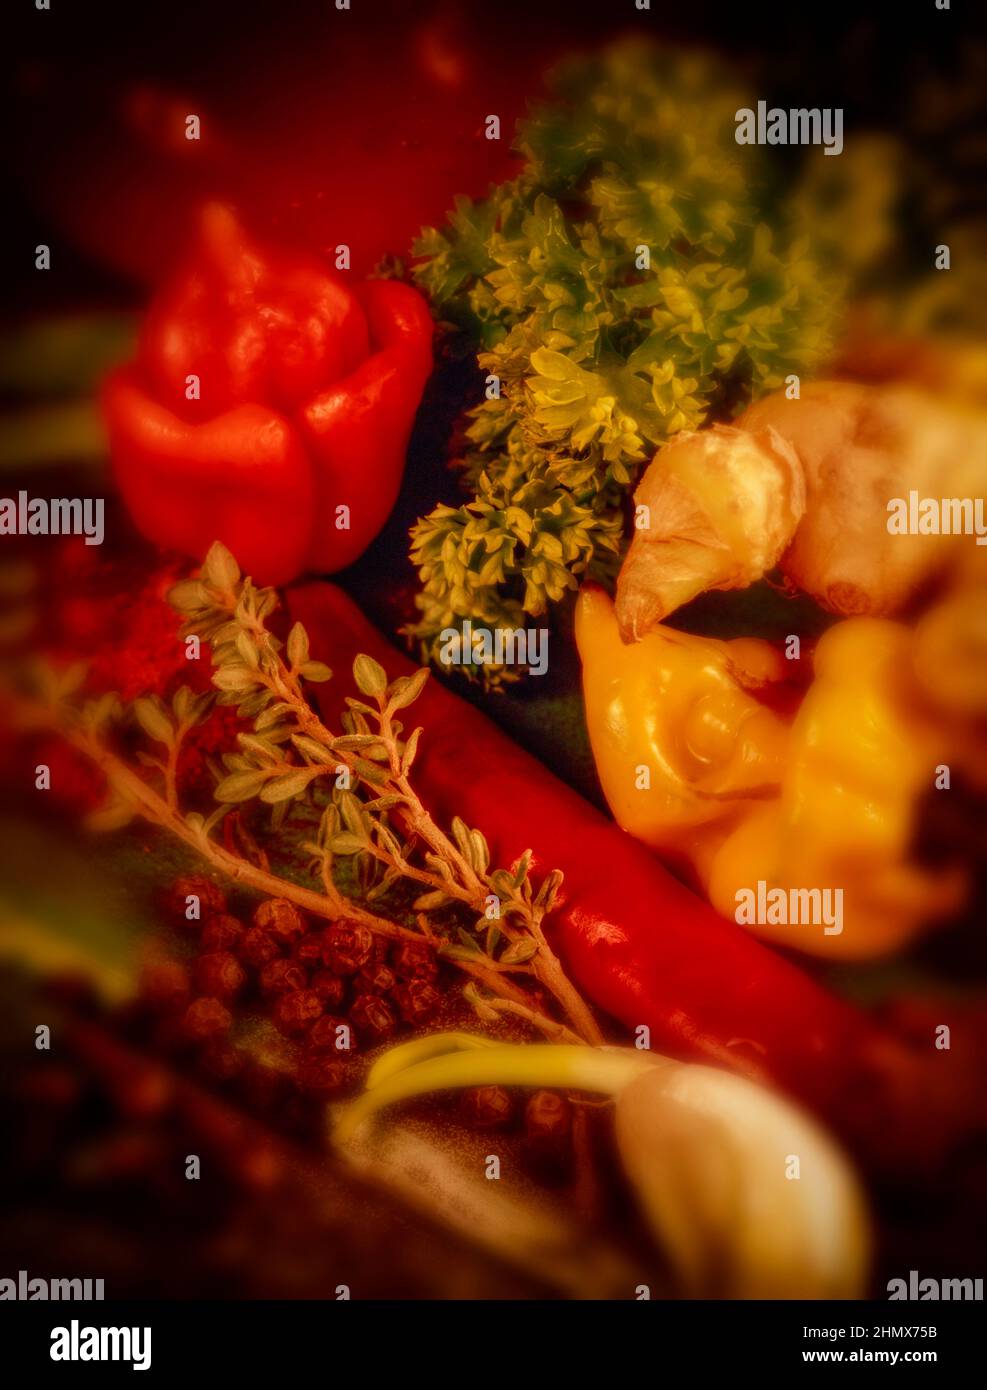 High resolution colourful food still life featuring ginger, thyme, garlic and scotch Bonnet peppers Stock Photo